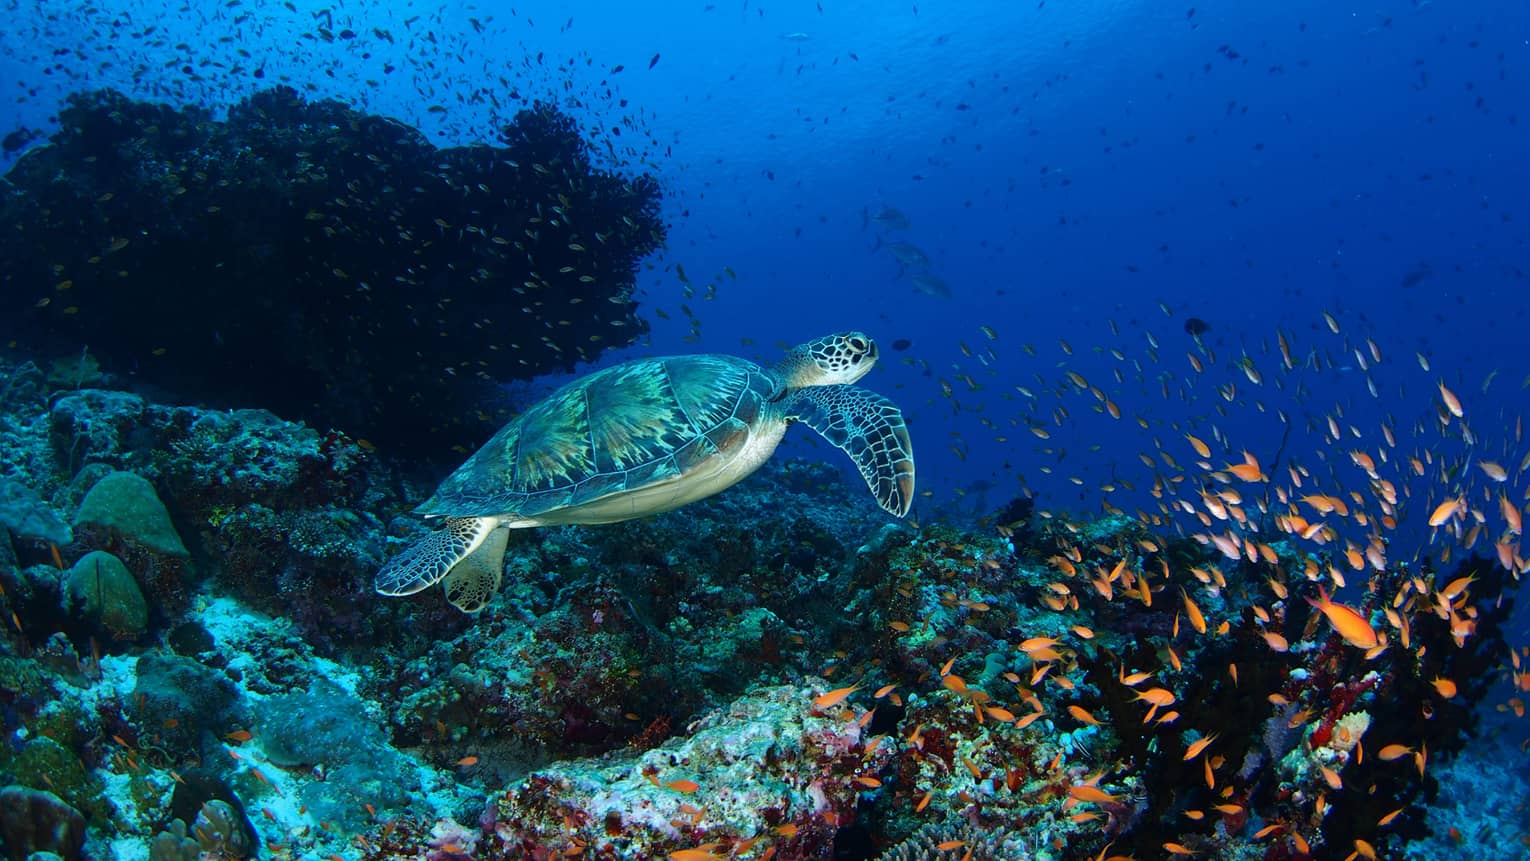 A turtle swimming through the deep blue waters of a coral reef.